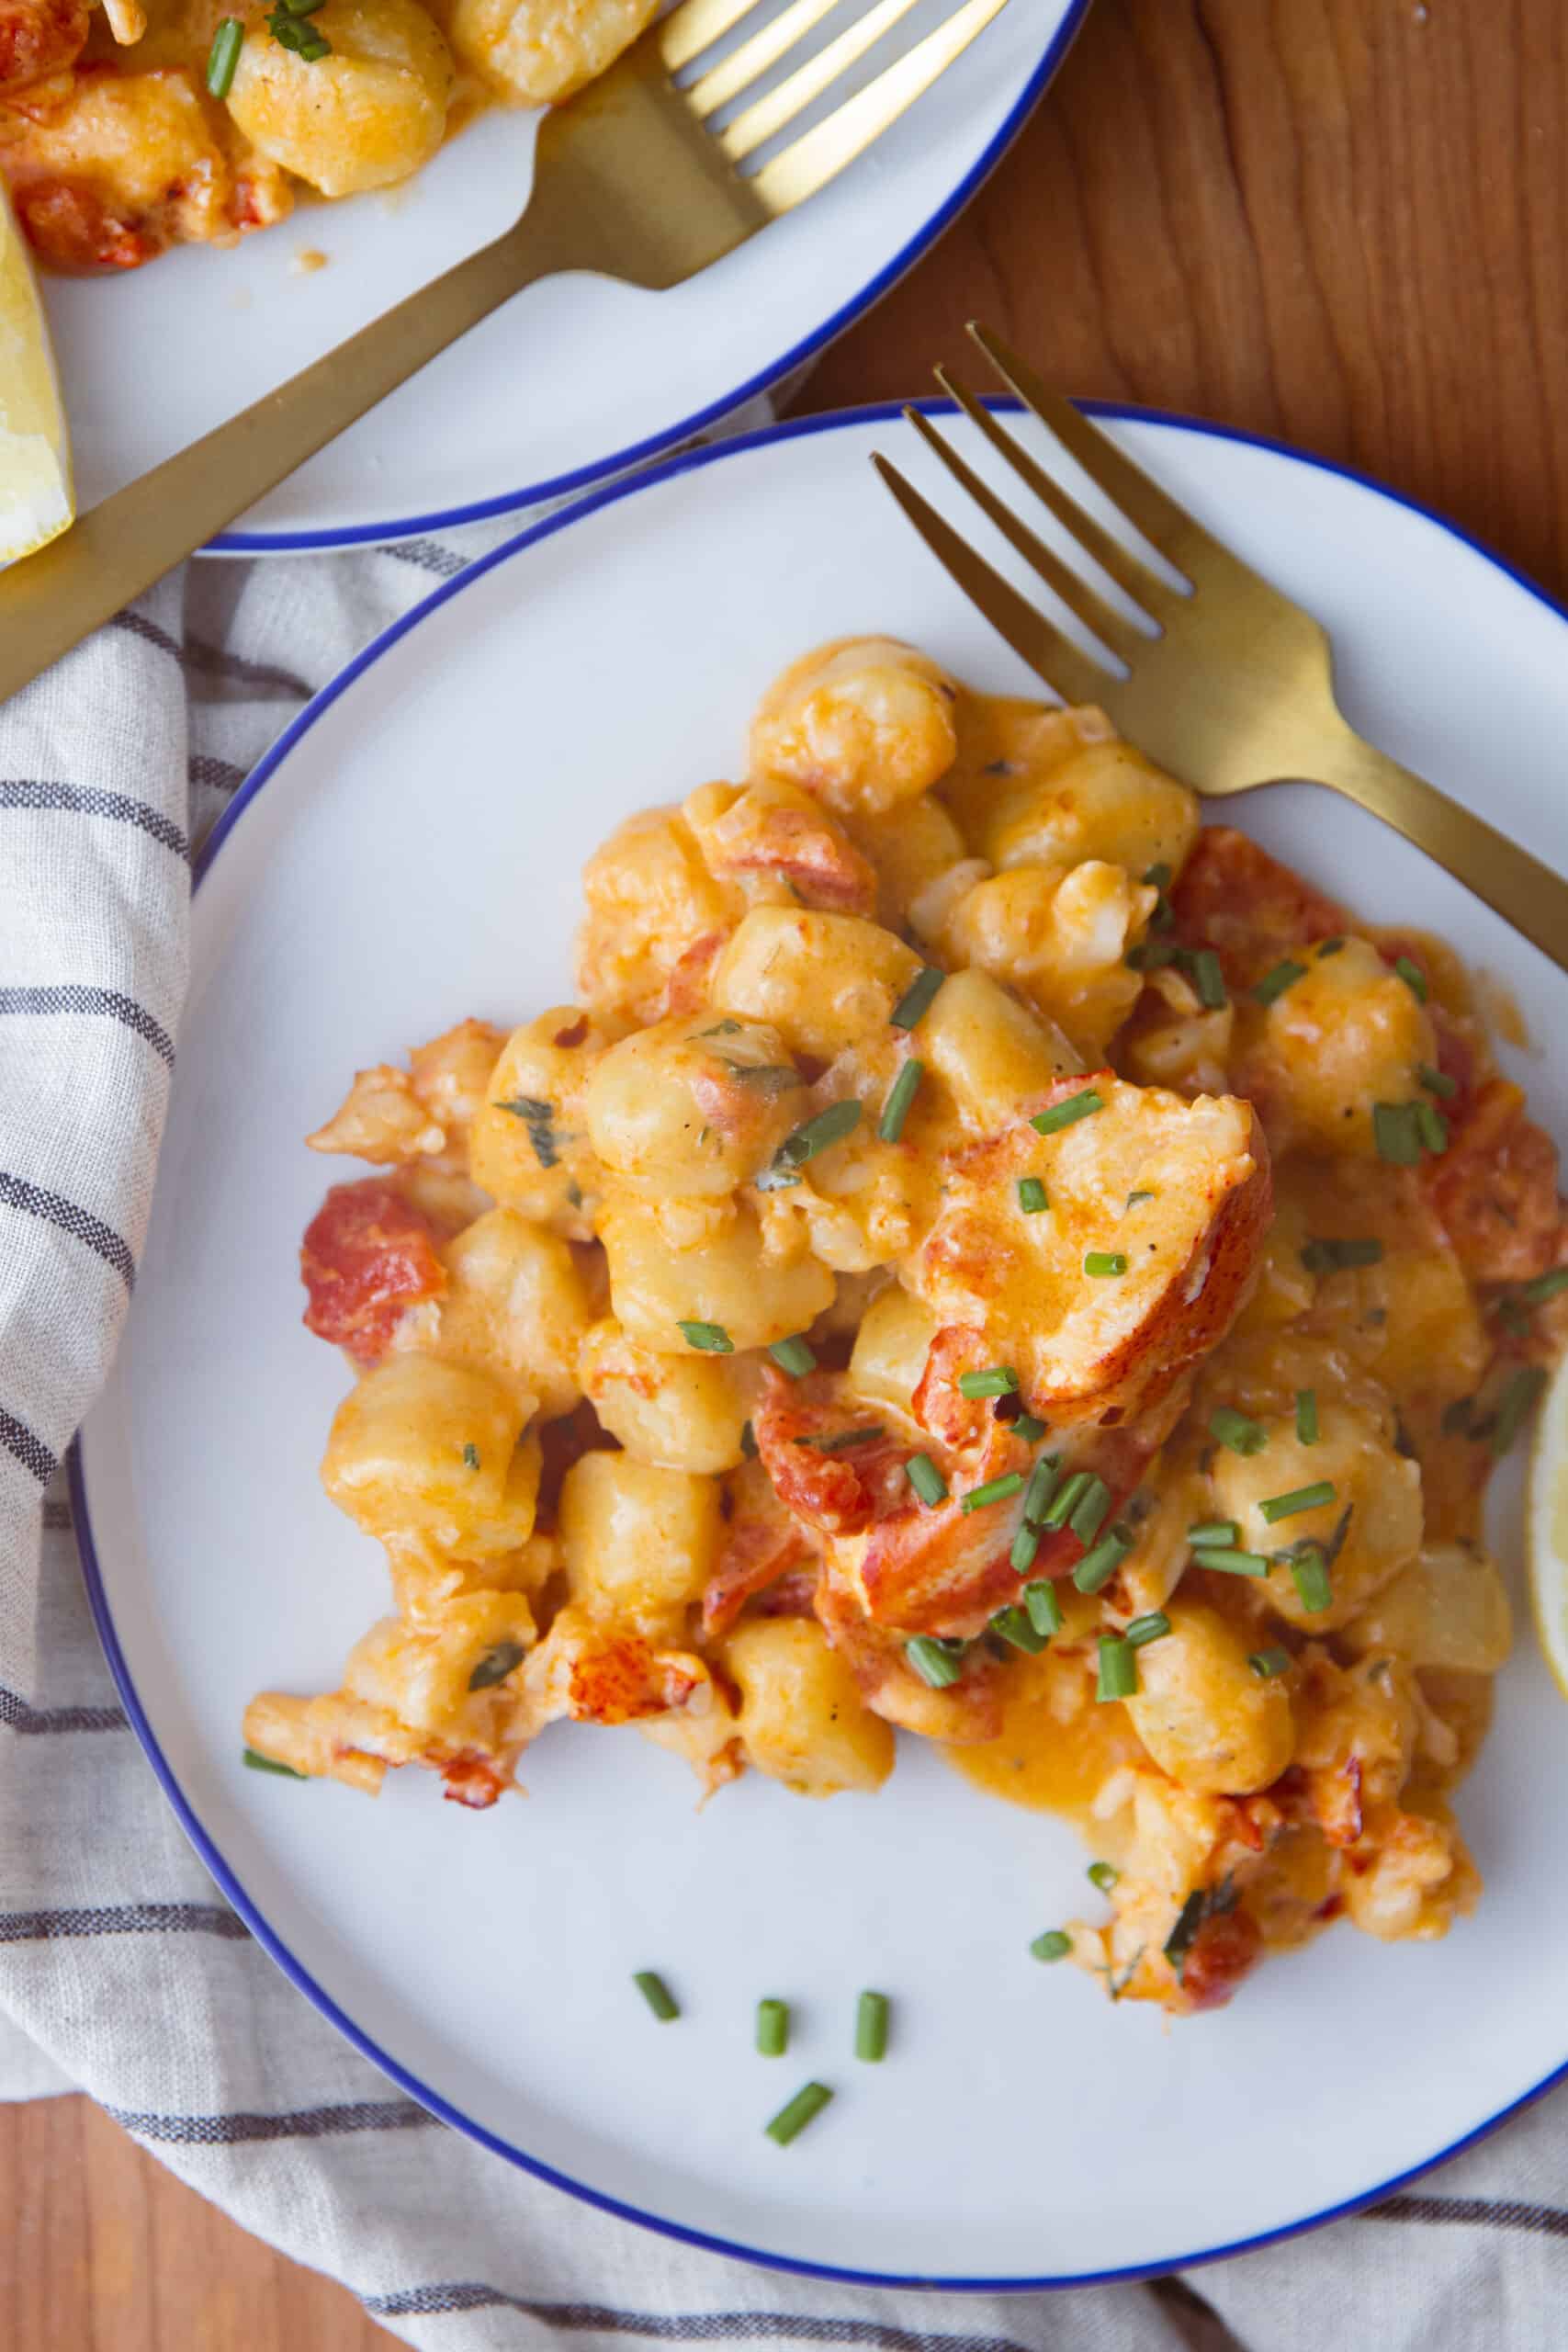 How to Make Lobster Gnocchi with Tomato Cream Sauce